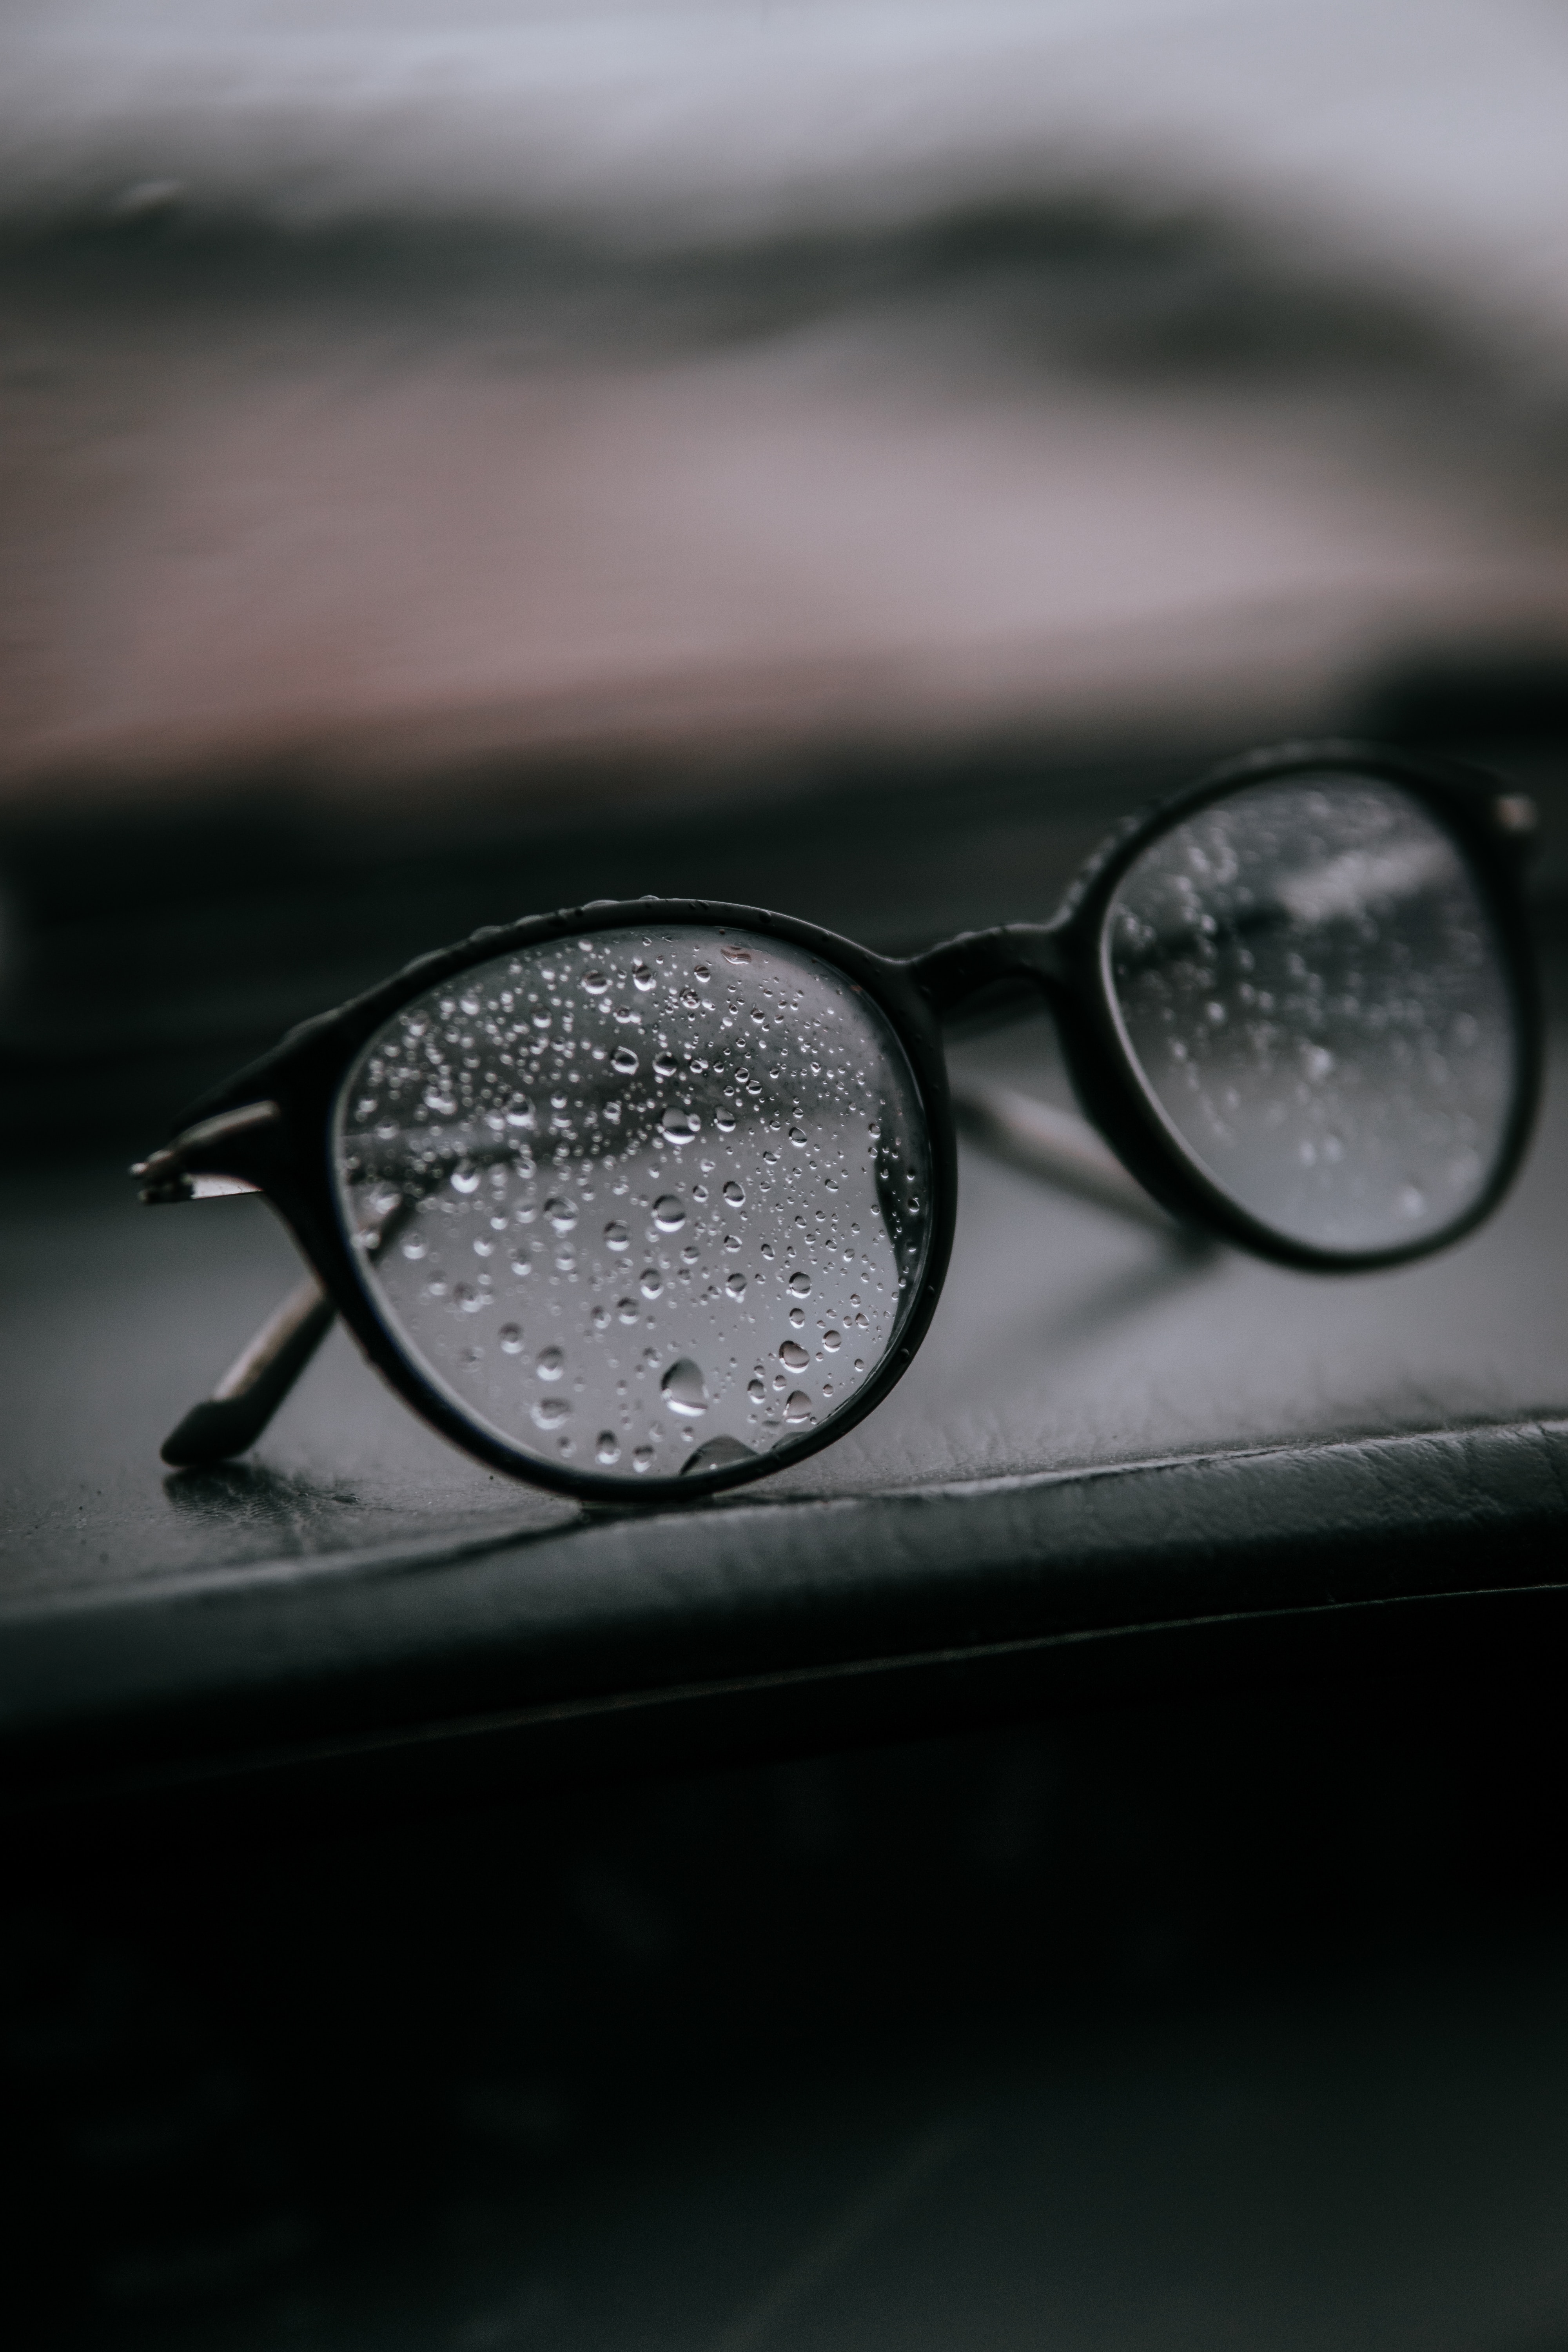 Free HD miscellanea, drops, miscellaneous, wet, glass, glasses, spectacles